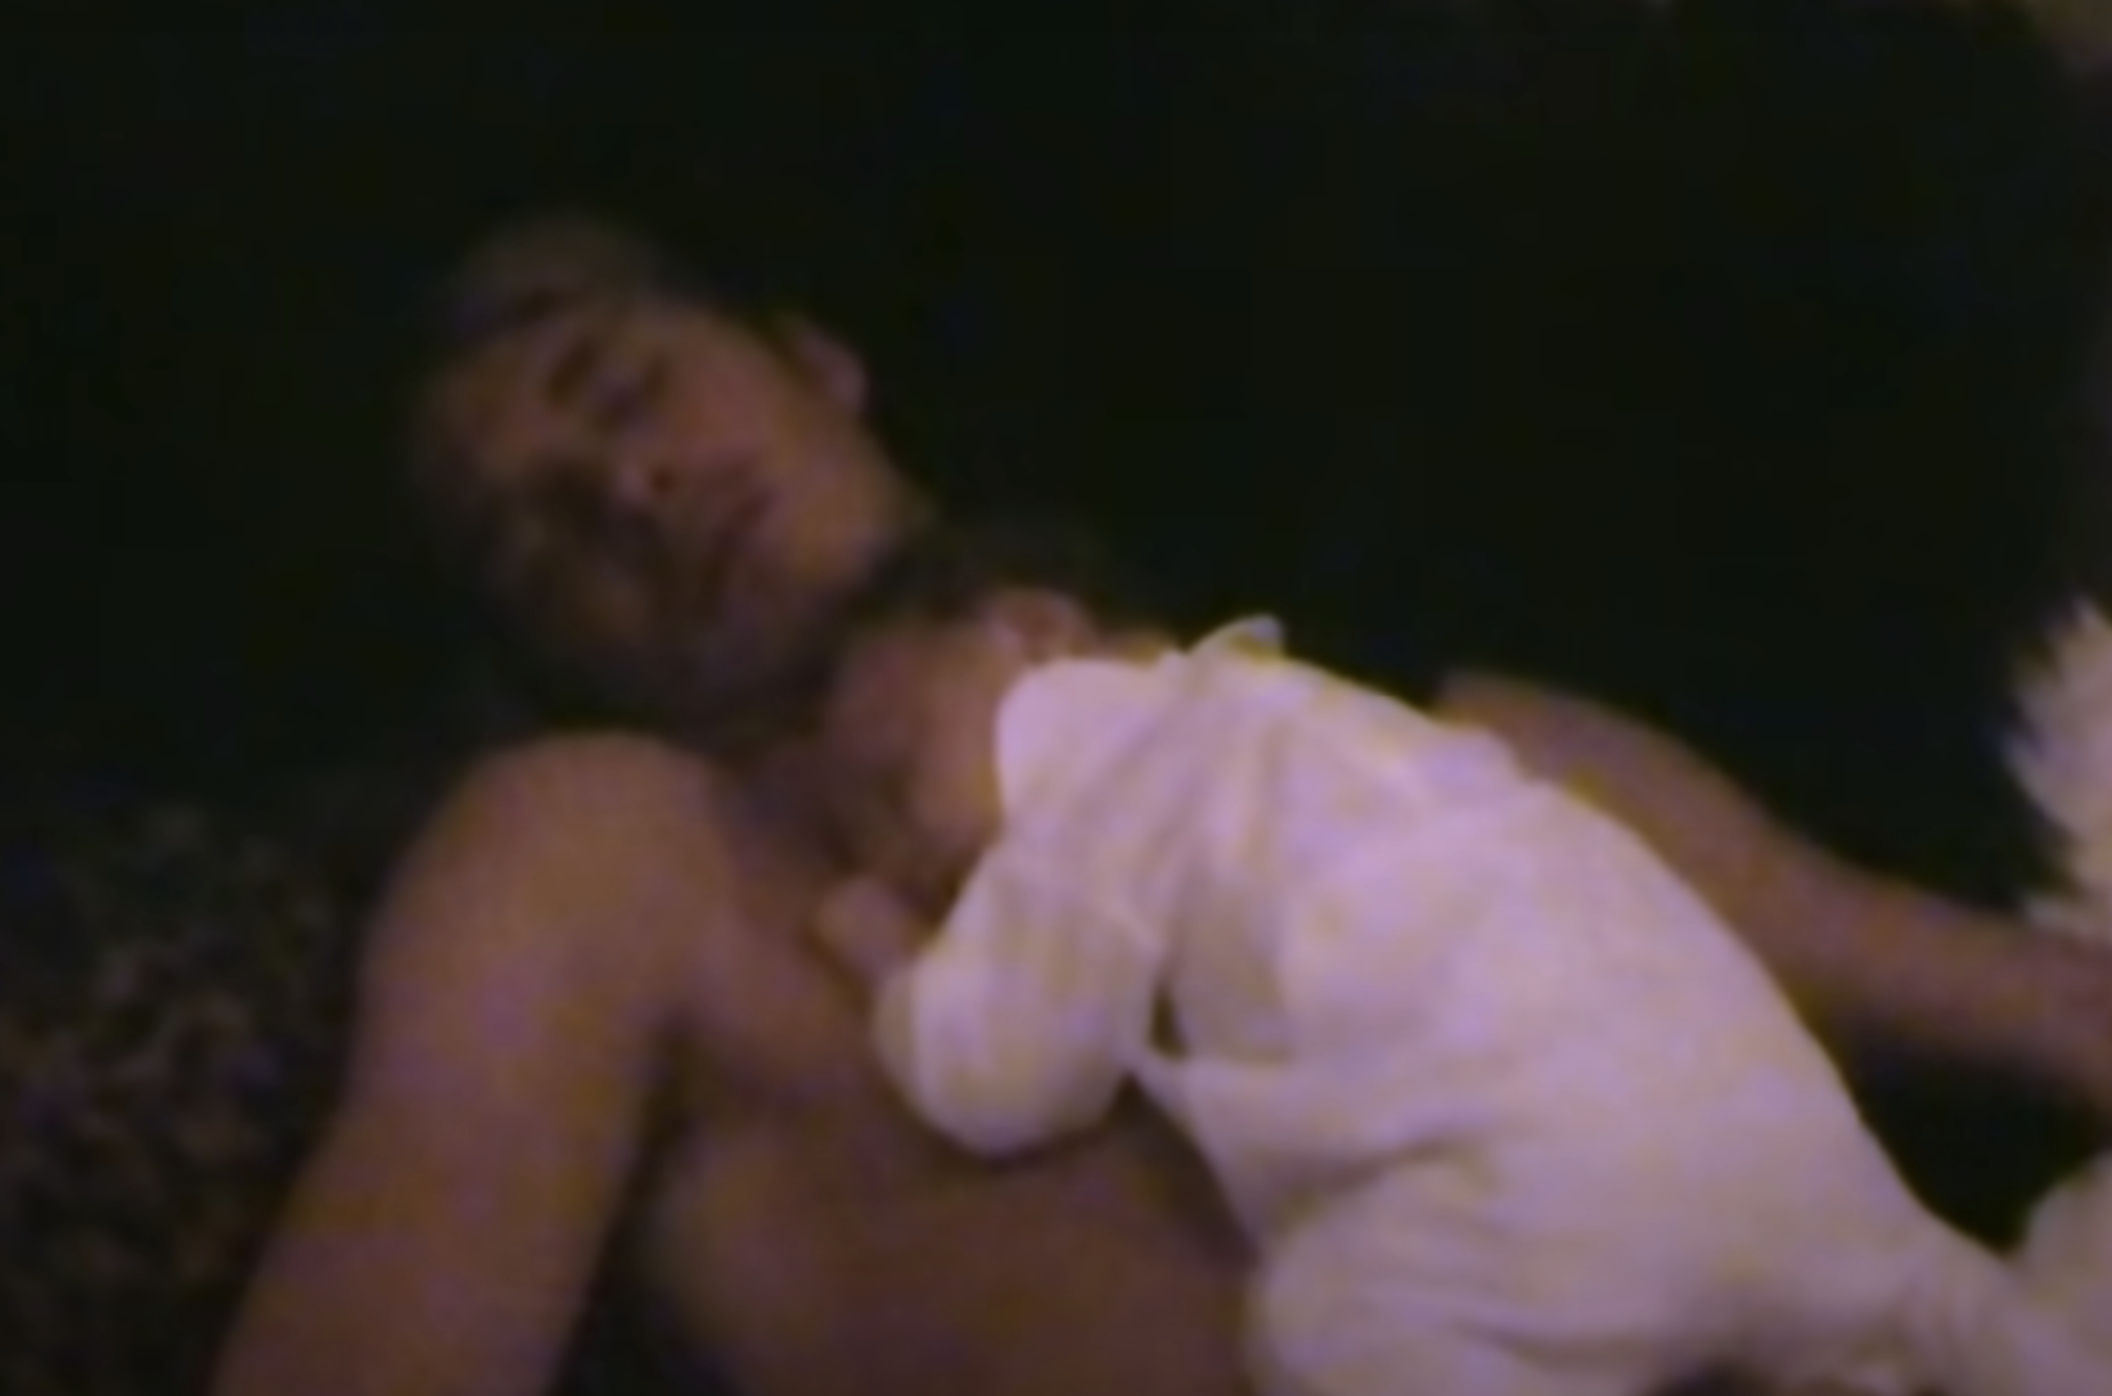 David lying down with baby Brooklyn on his bare chest